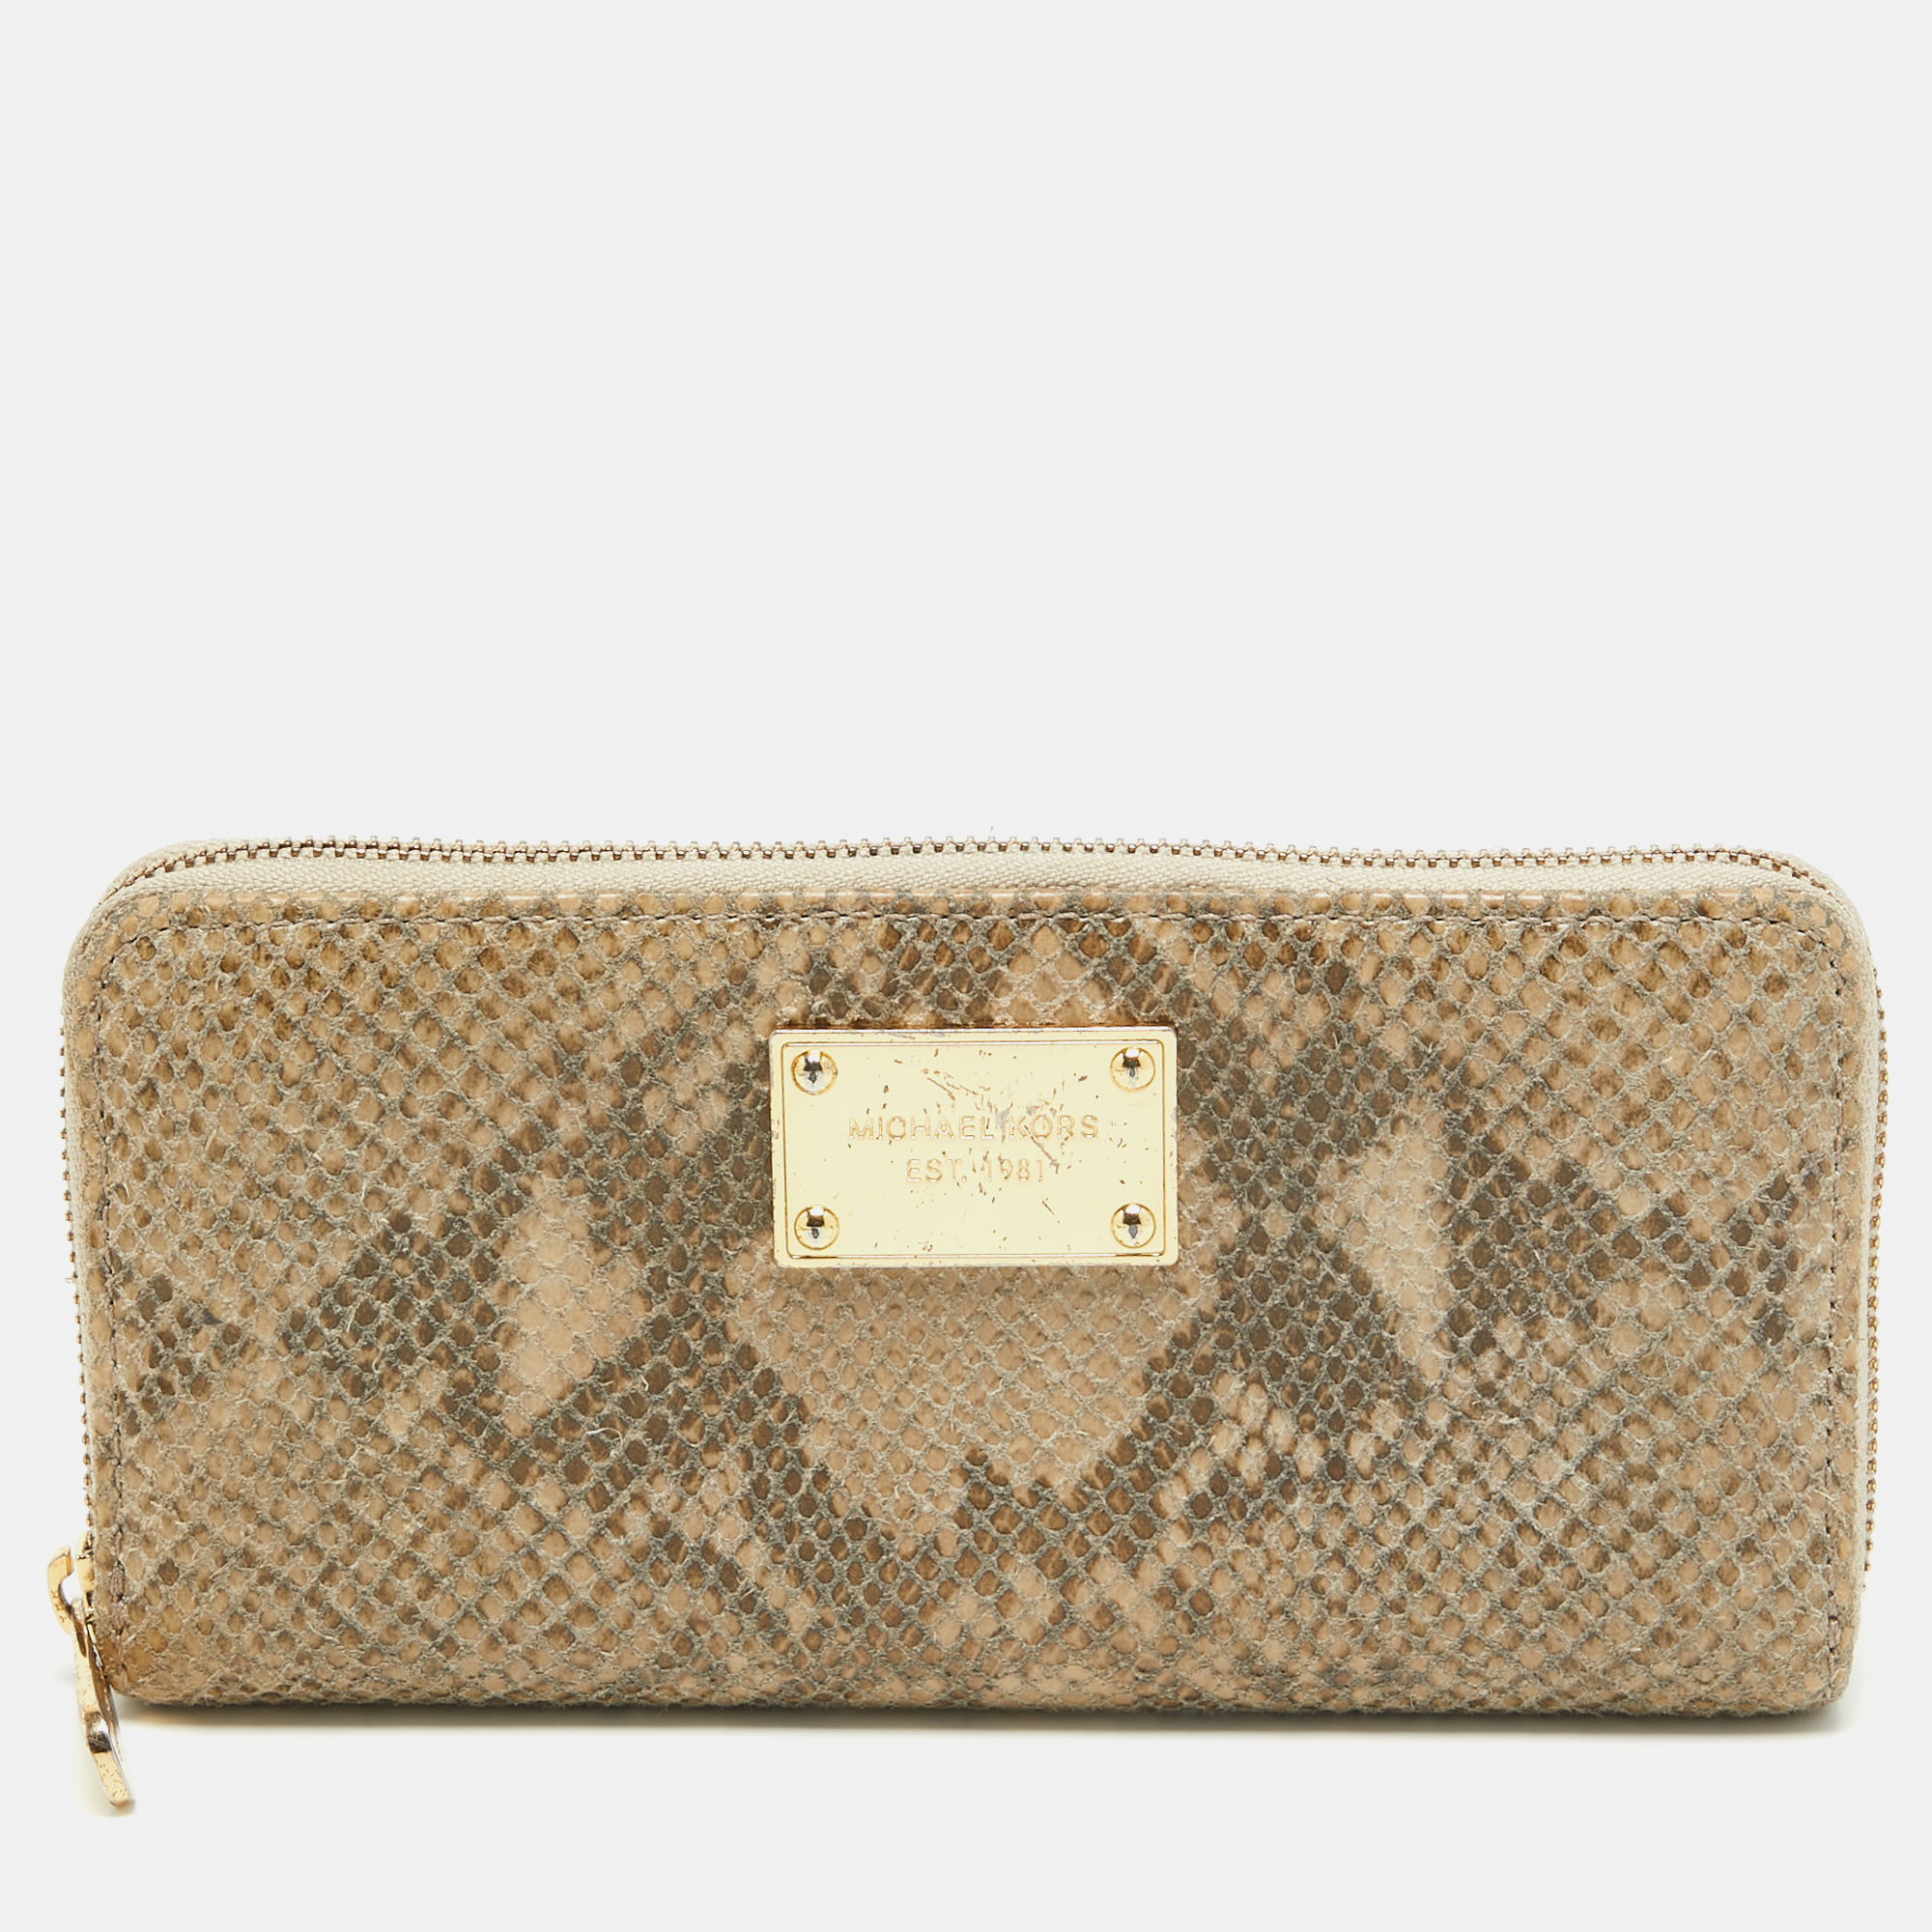 Michael Kors Olive Green Python Embossed Leather Zip Around Wallet